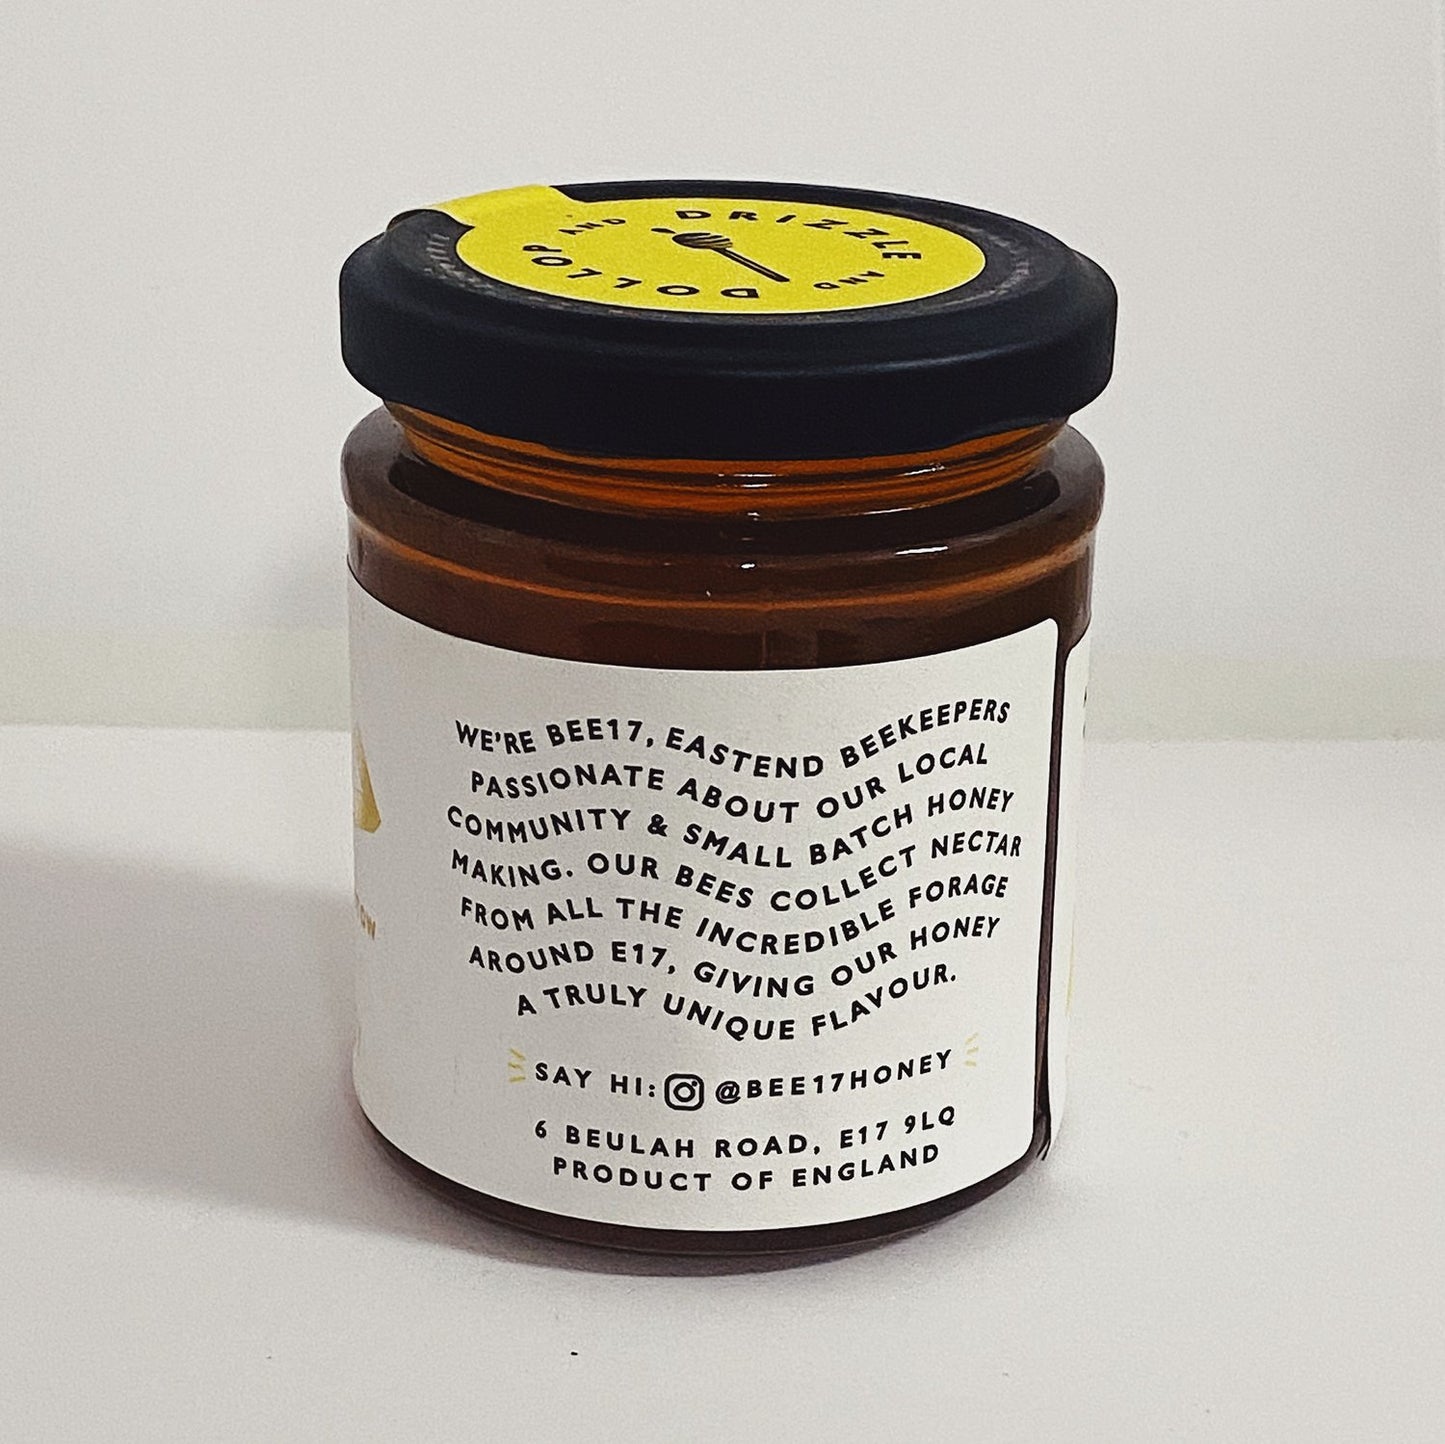 Summer Honey From Walthamstow Bees